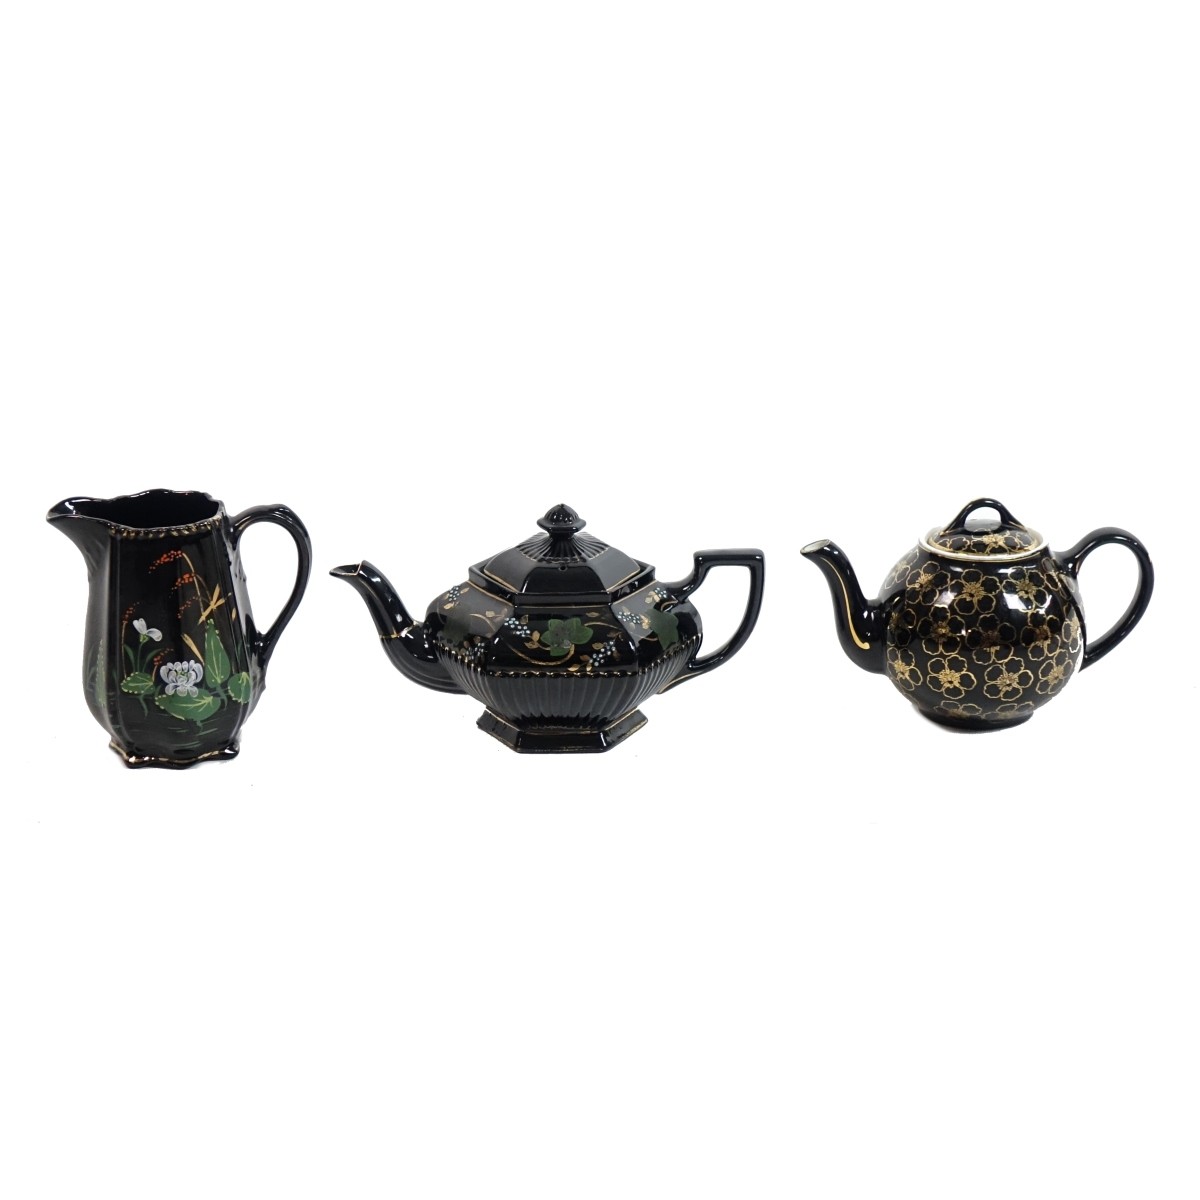 Two (2) Black Teapots and Jug